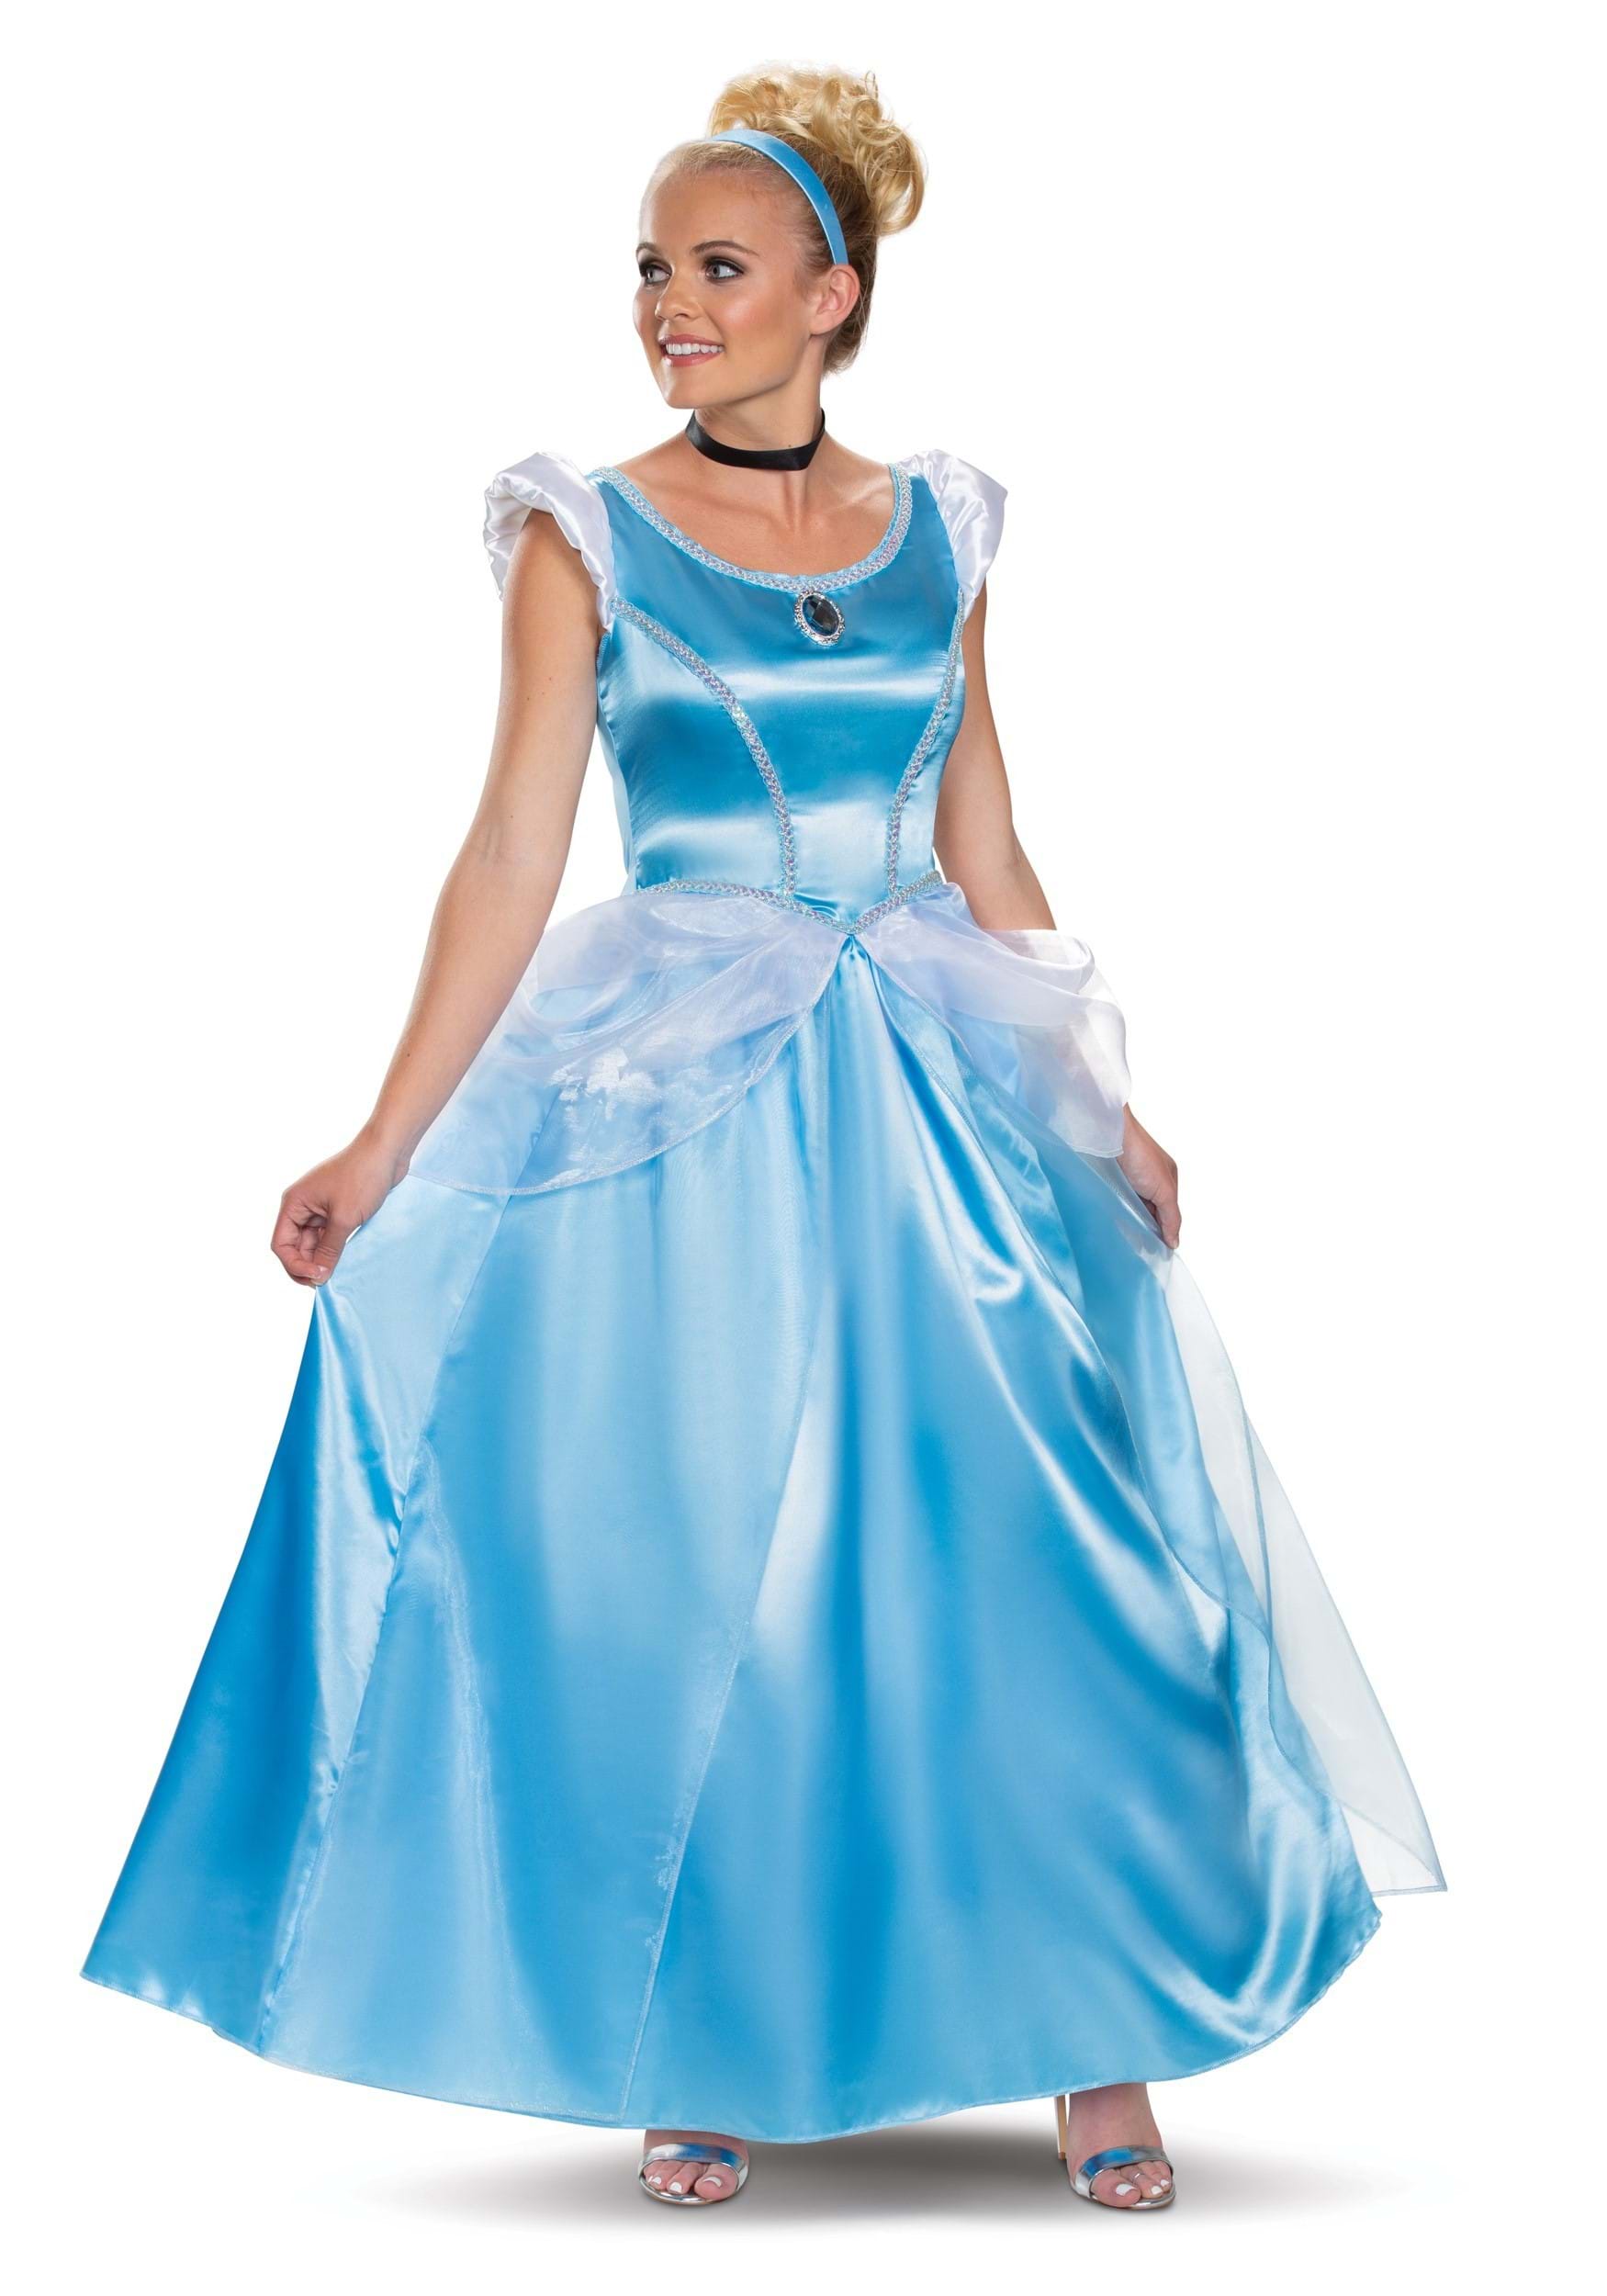 Plus Size Disney Costumes 2017 - Women's Characters  Costumes for women, Adult  princess costume, Deluxe dress